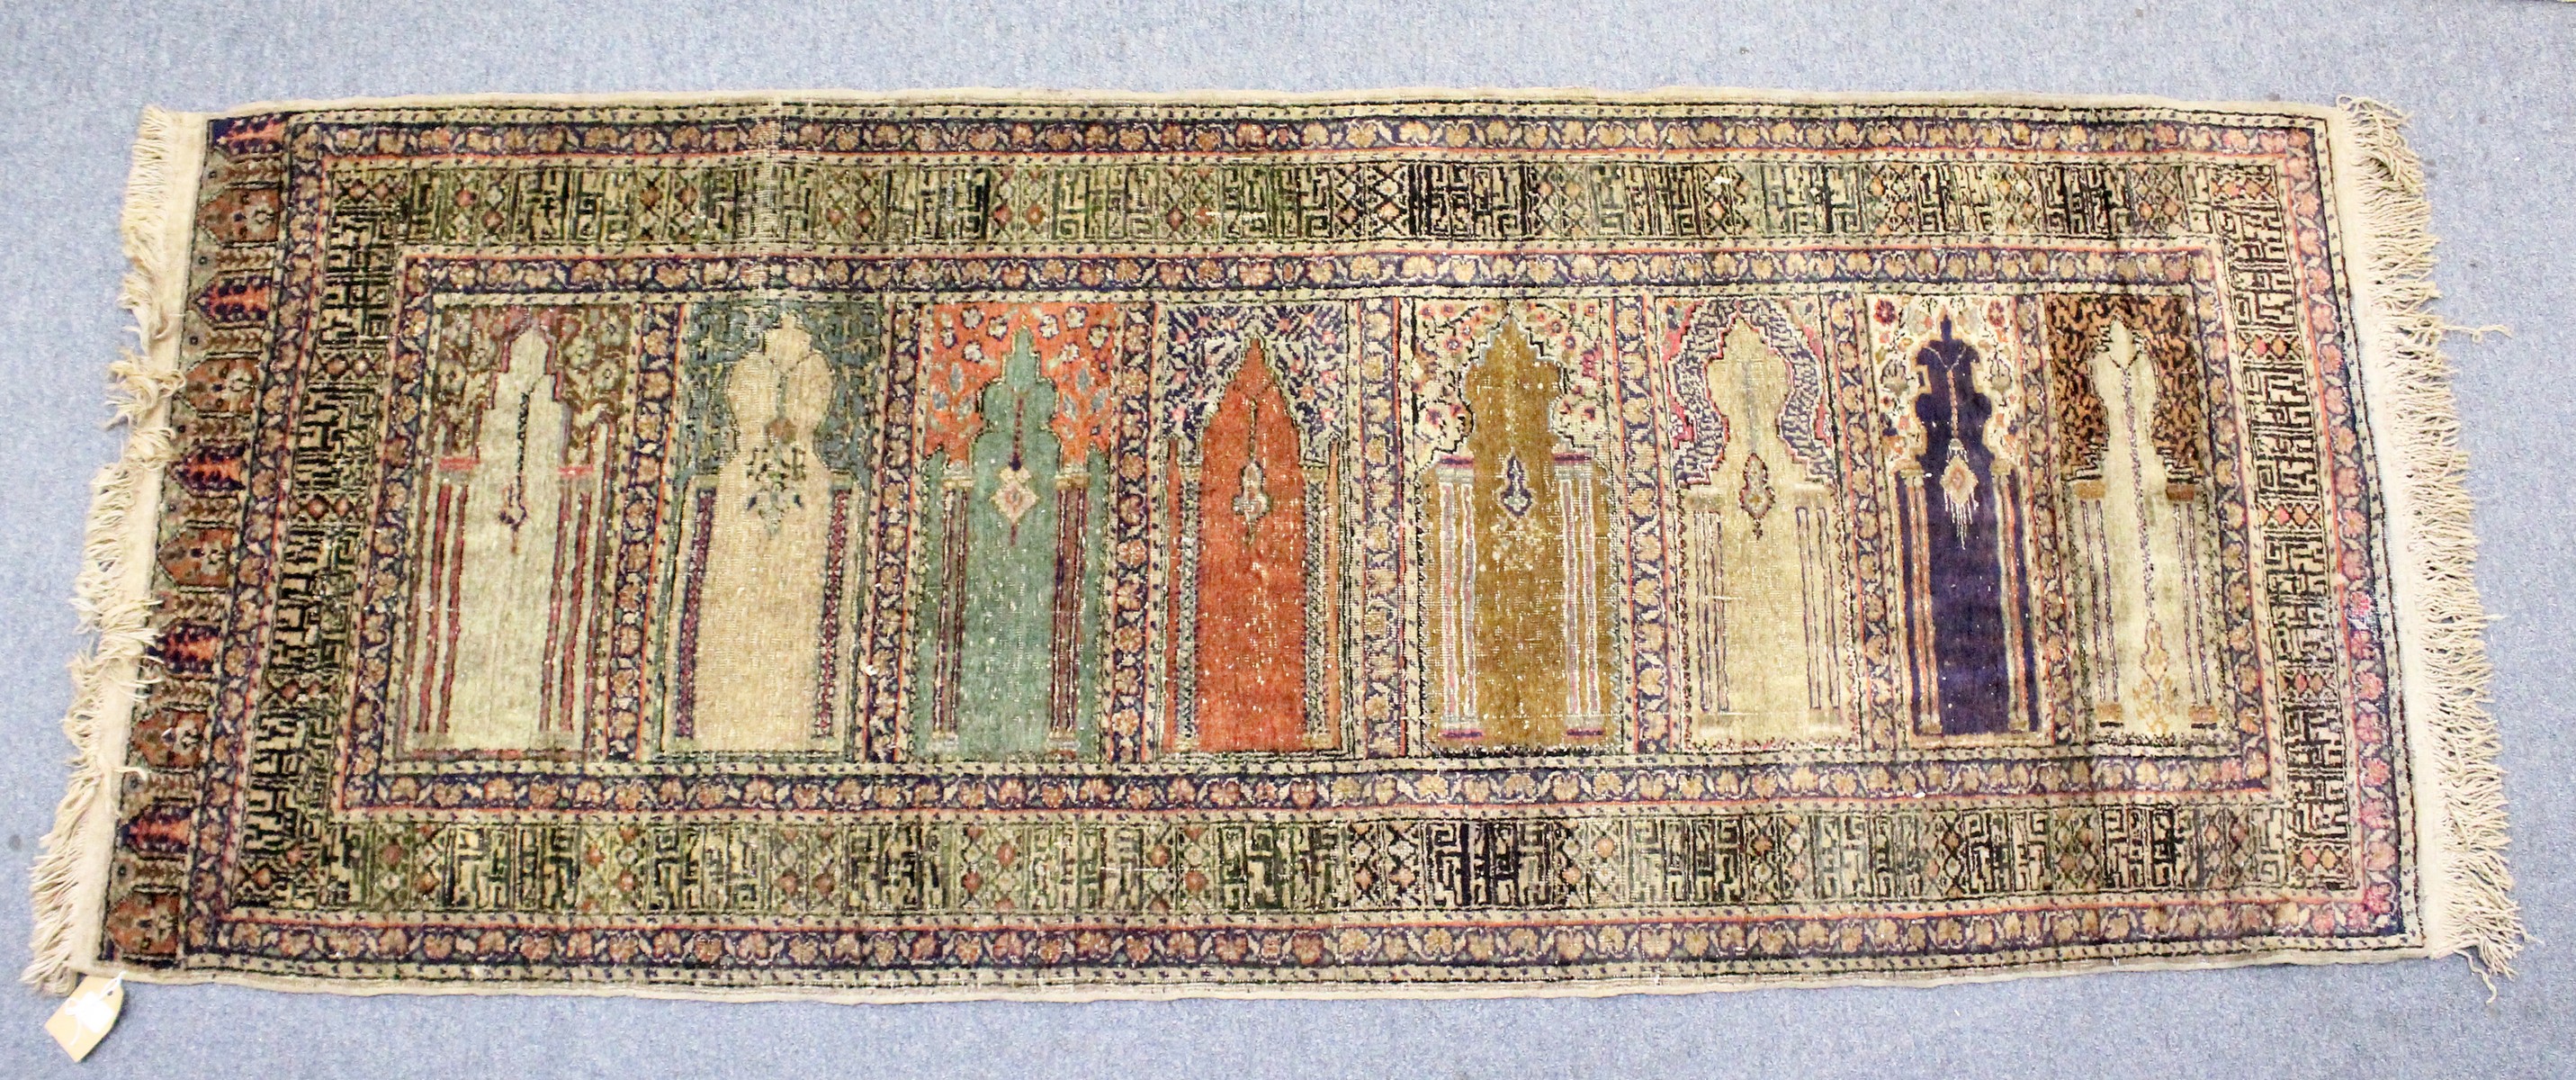 AN UNUSUAL PERSIAN PRAYER RUG, the central panel with eight arches and hanging lamps, within a